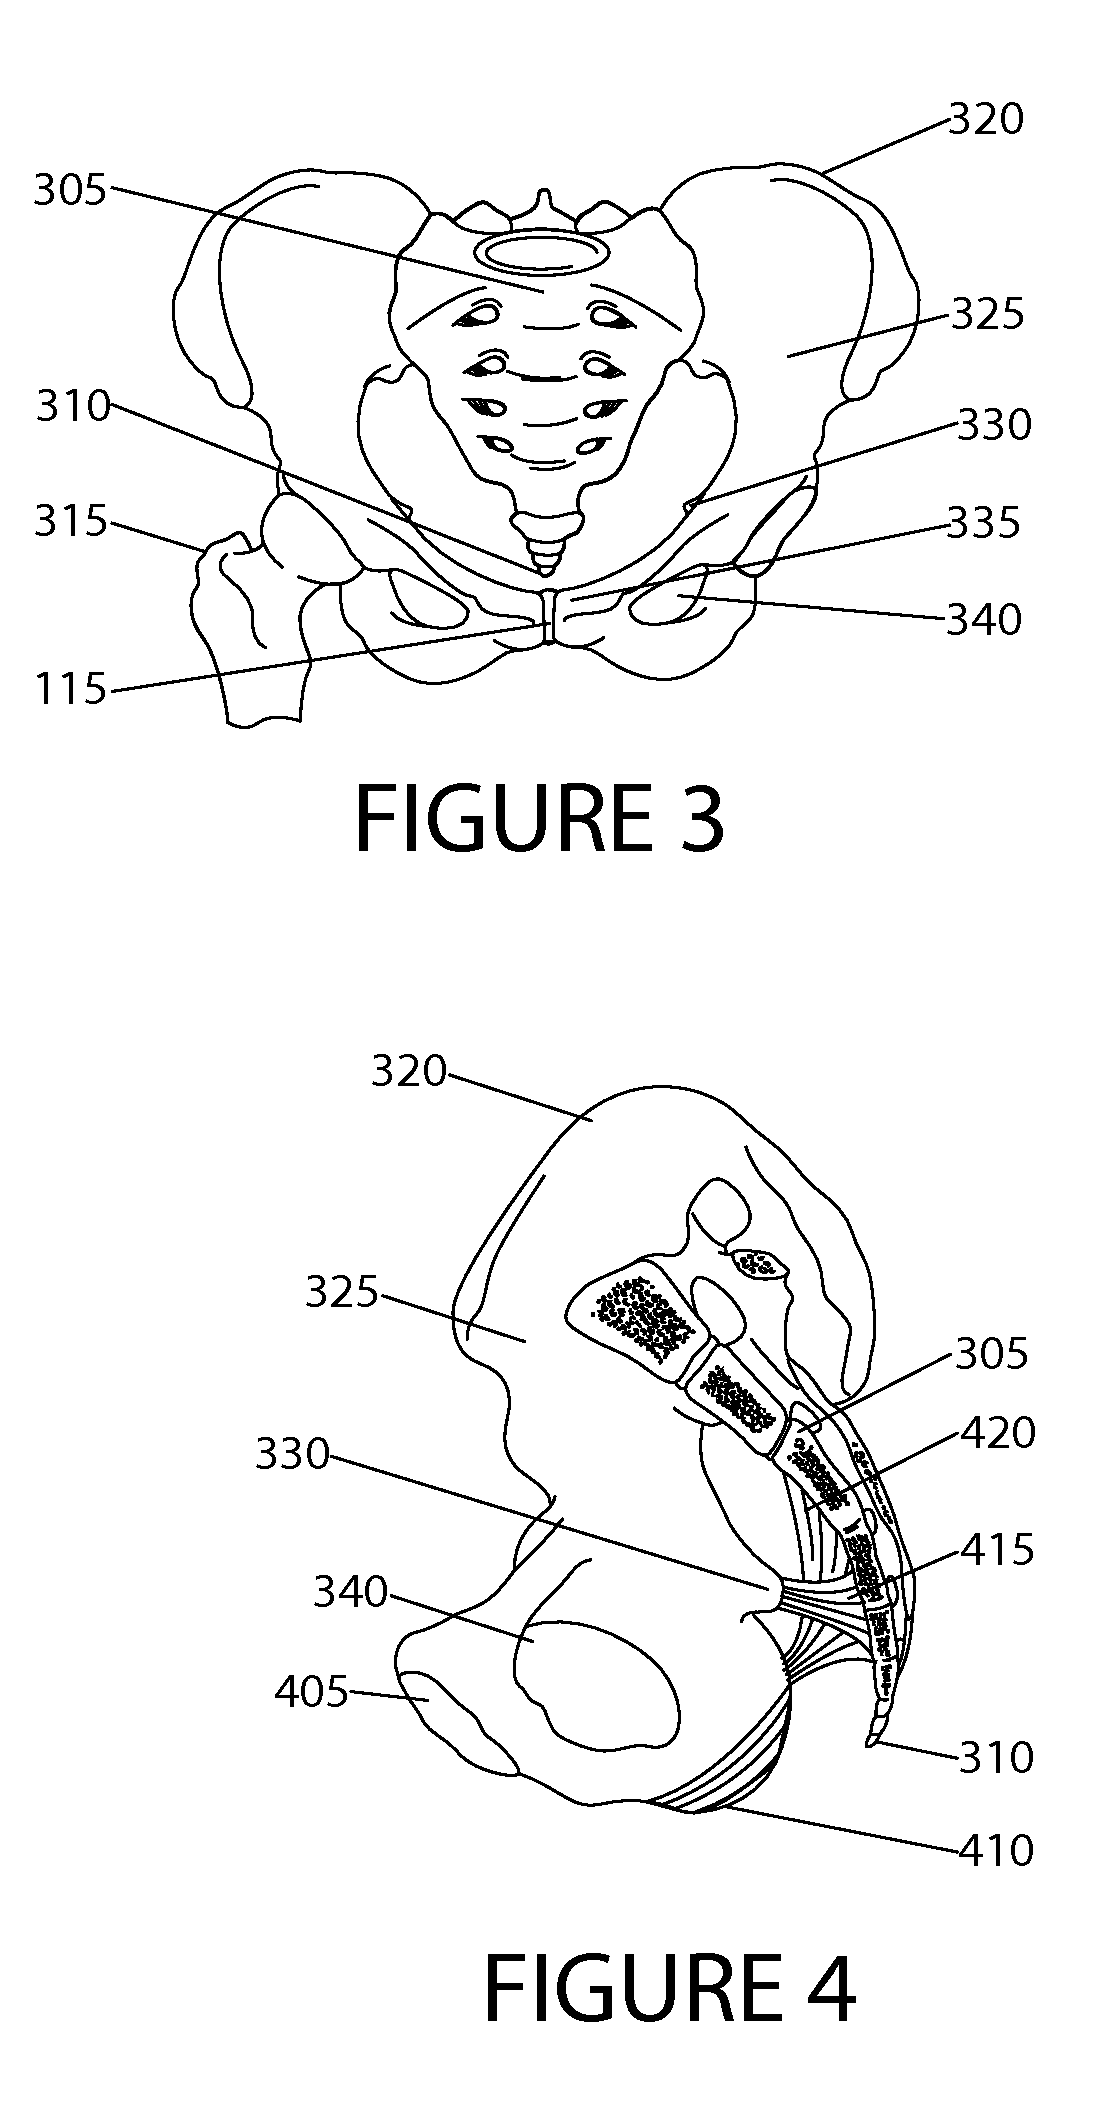 Surgical devices and method for vaginal prolapse repair